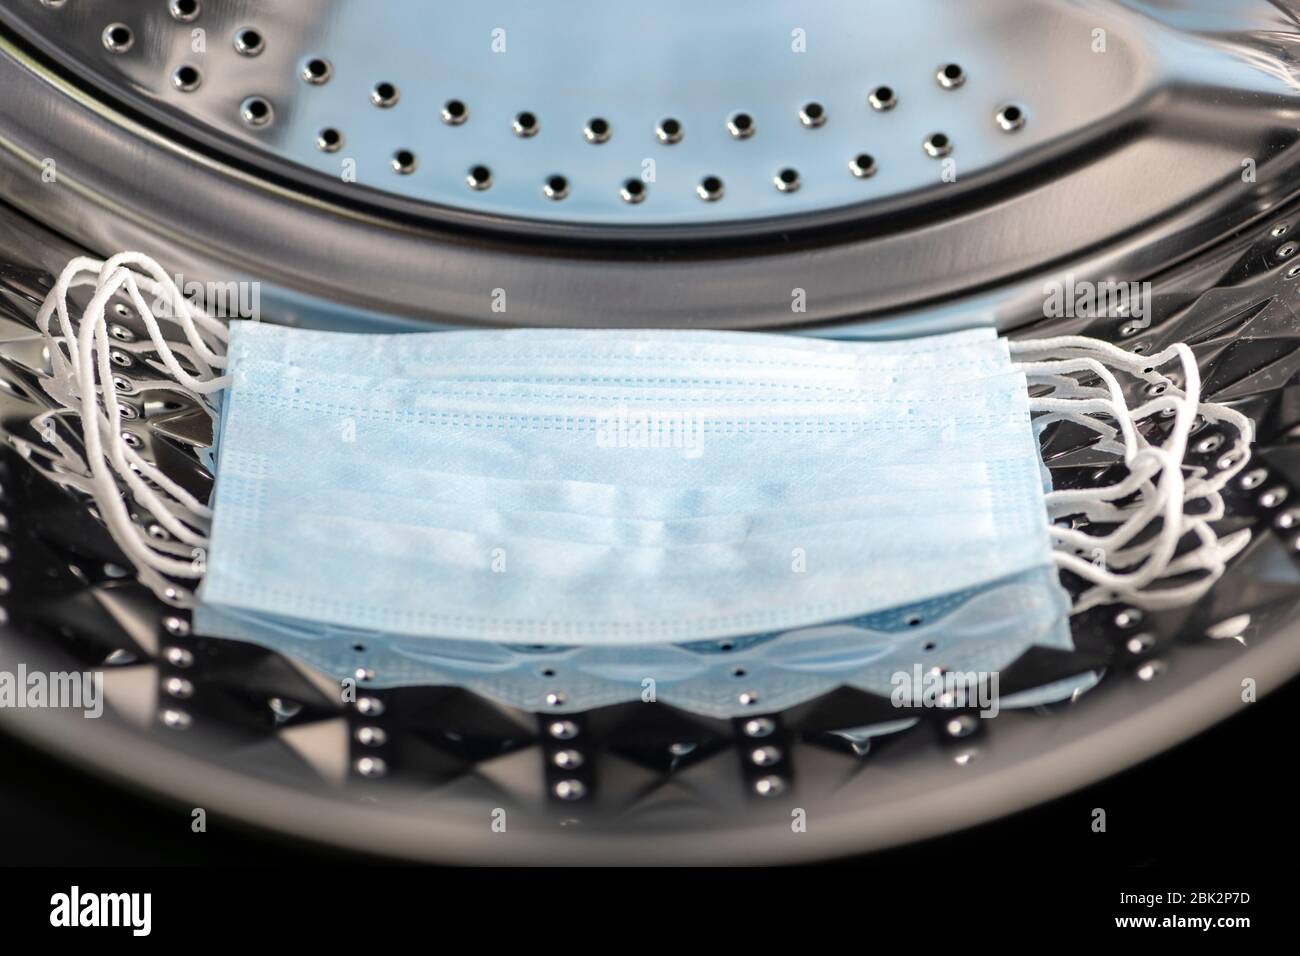 PPE face masks in a washing machine. Concept of PPE shortages & re-use. Wash face mask due to PPE supply problems, UK. Stock Photo